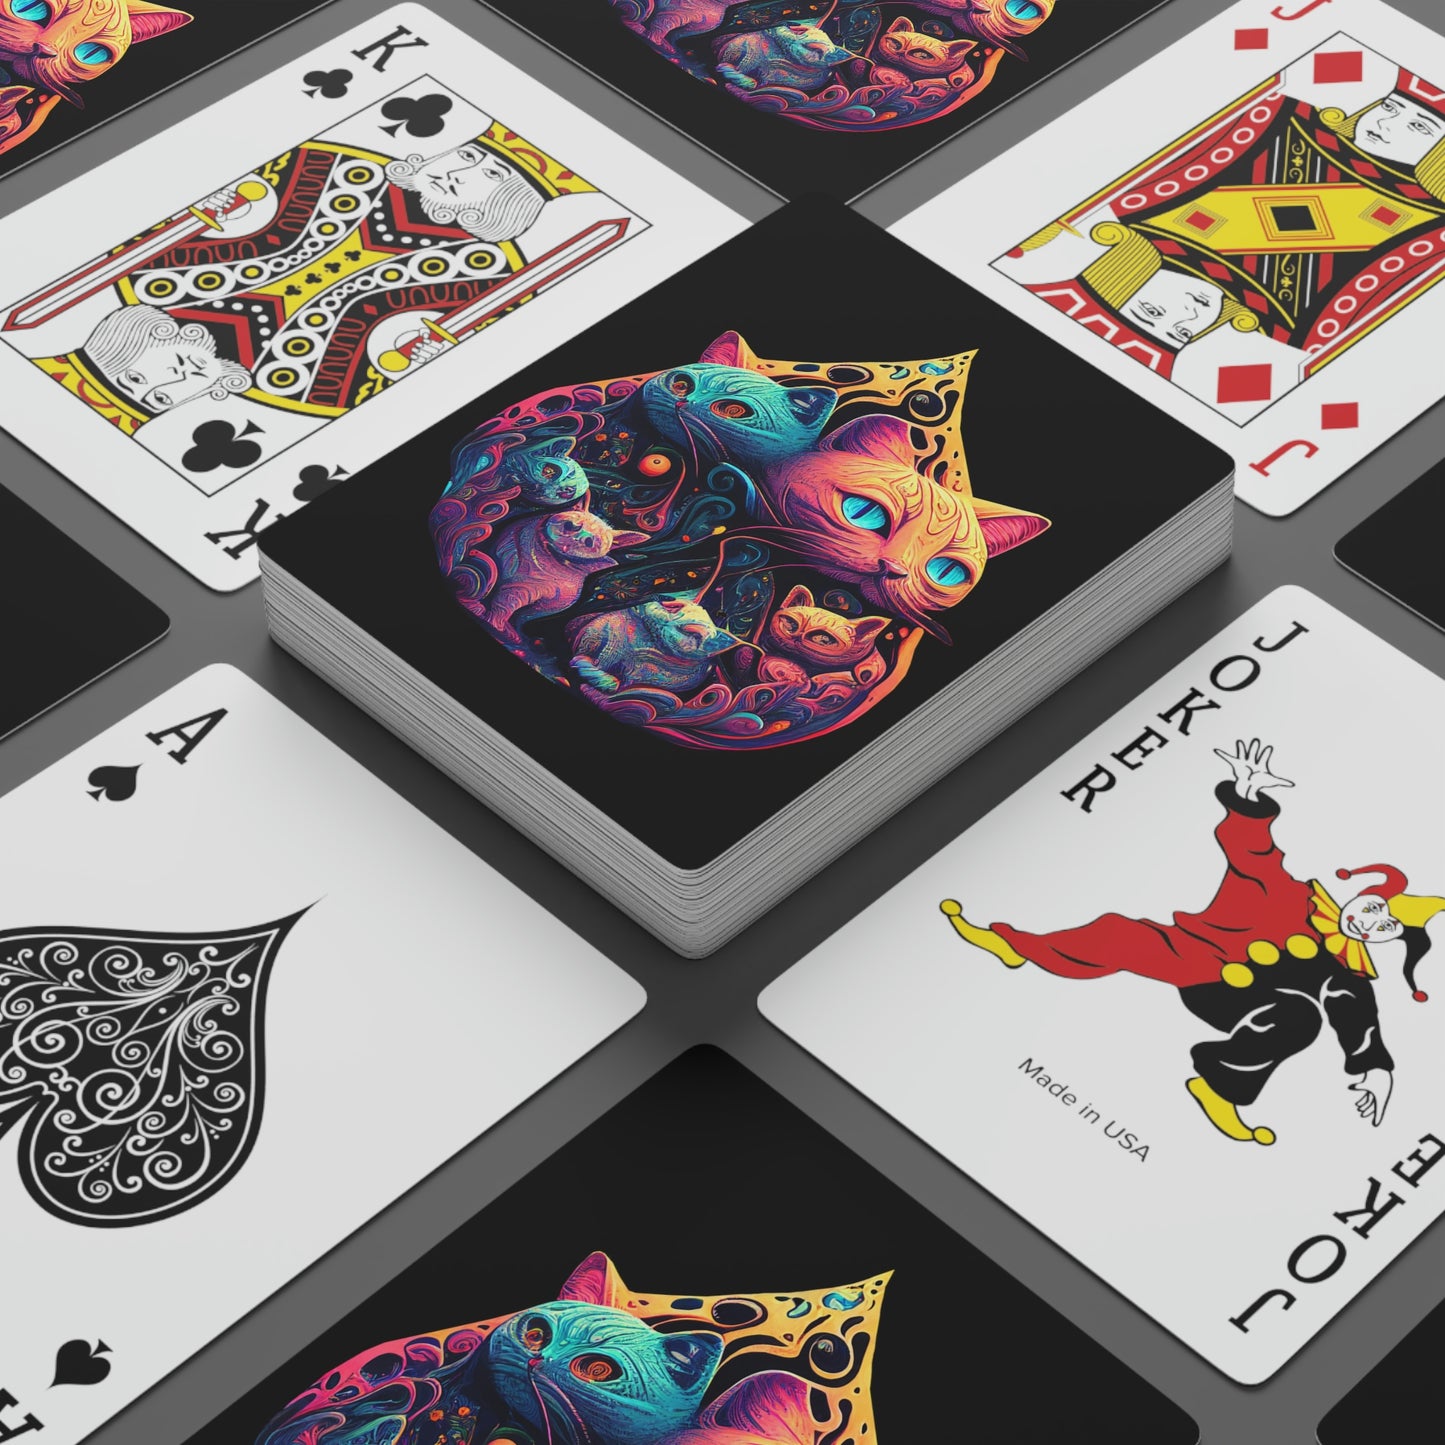 Psychedelic Cats Playing Cards